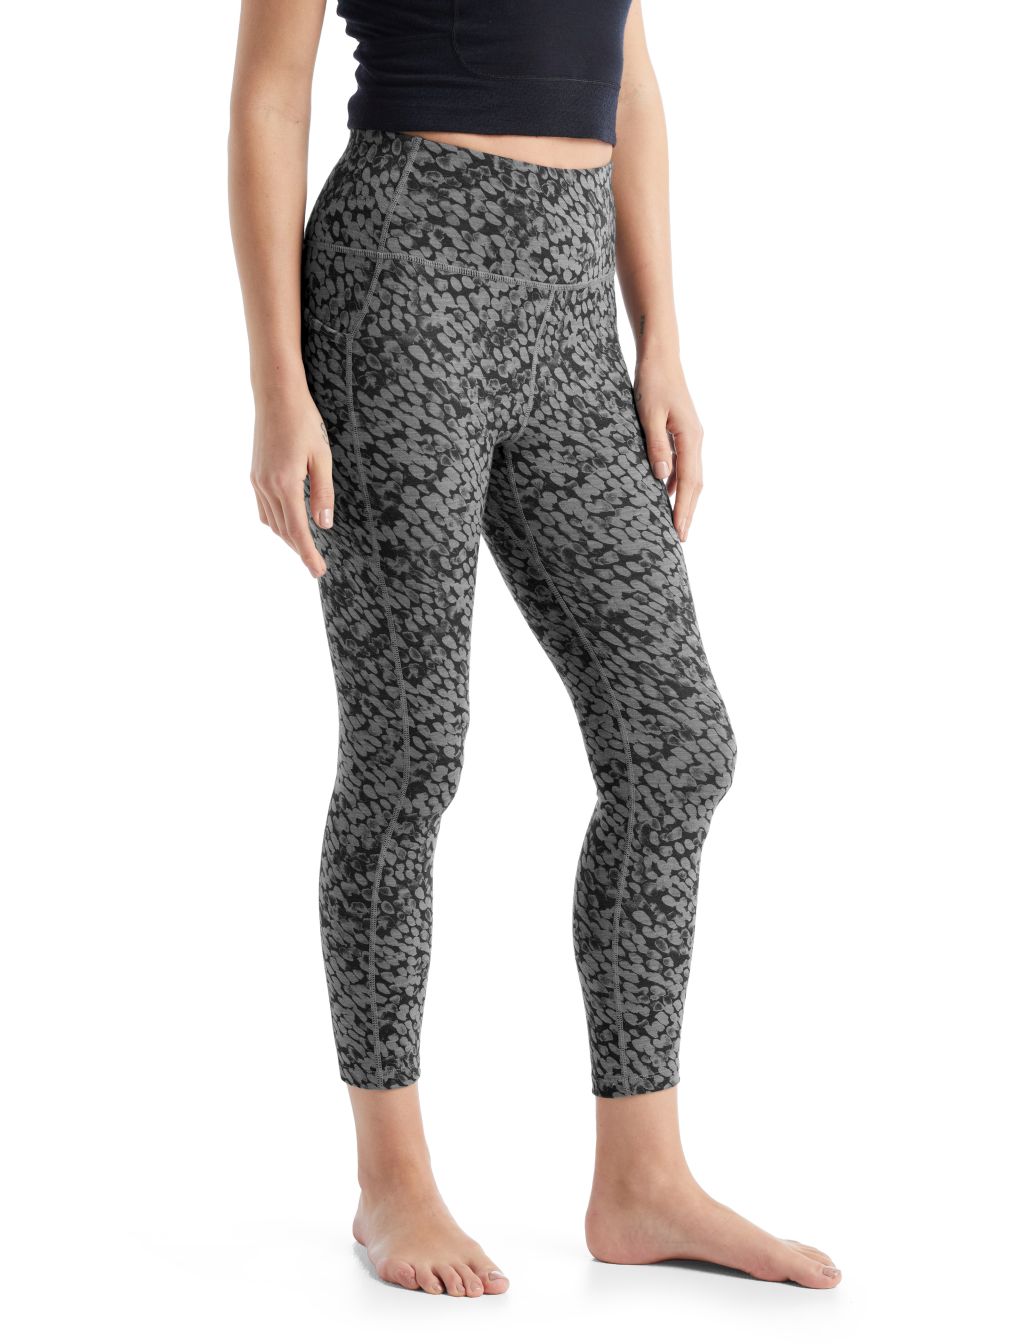 Dámské merino kalhoty ICEBREAKER Wmns Fastray High Rise Tights Forest Shadow, Metro Heather/Aop velikost: XS